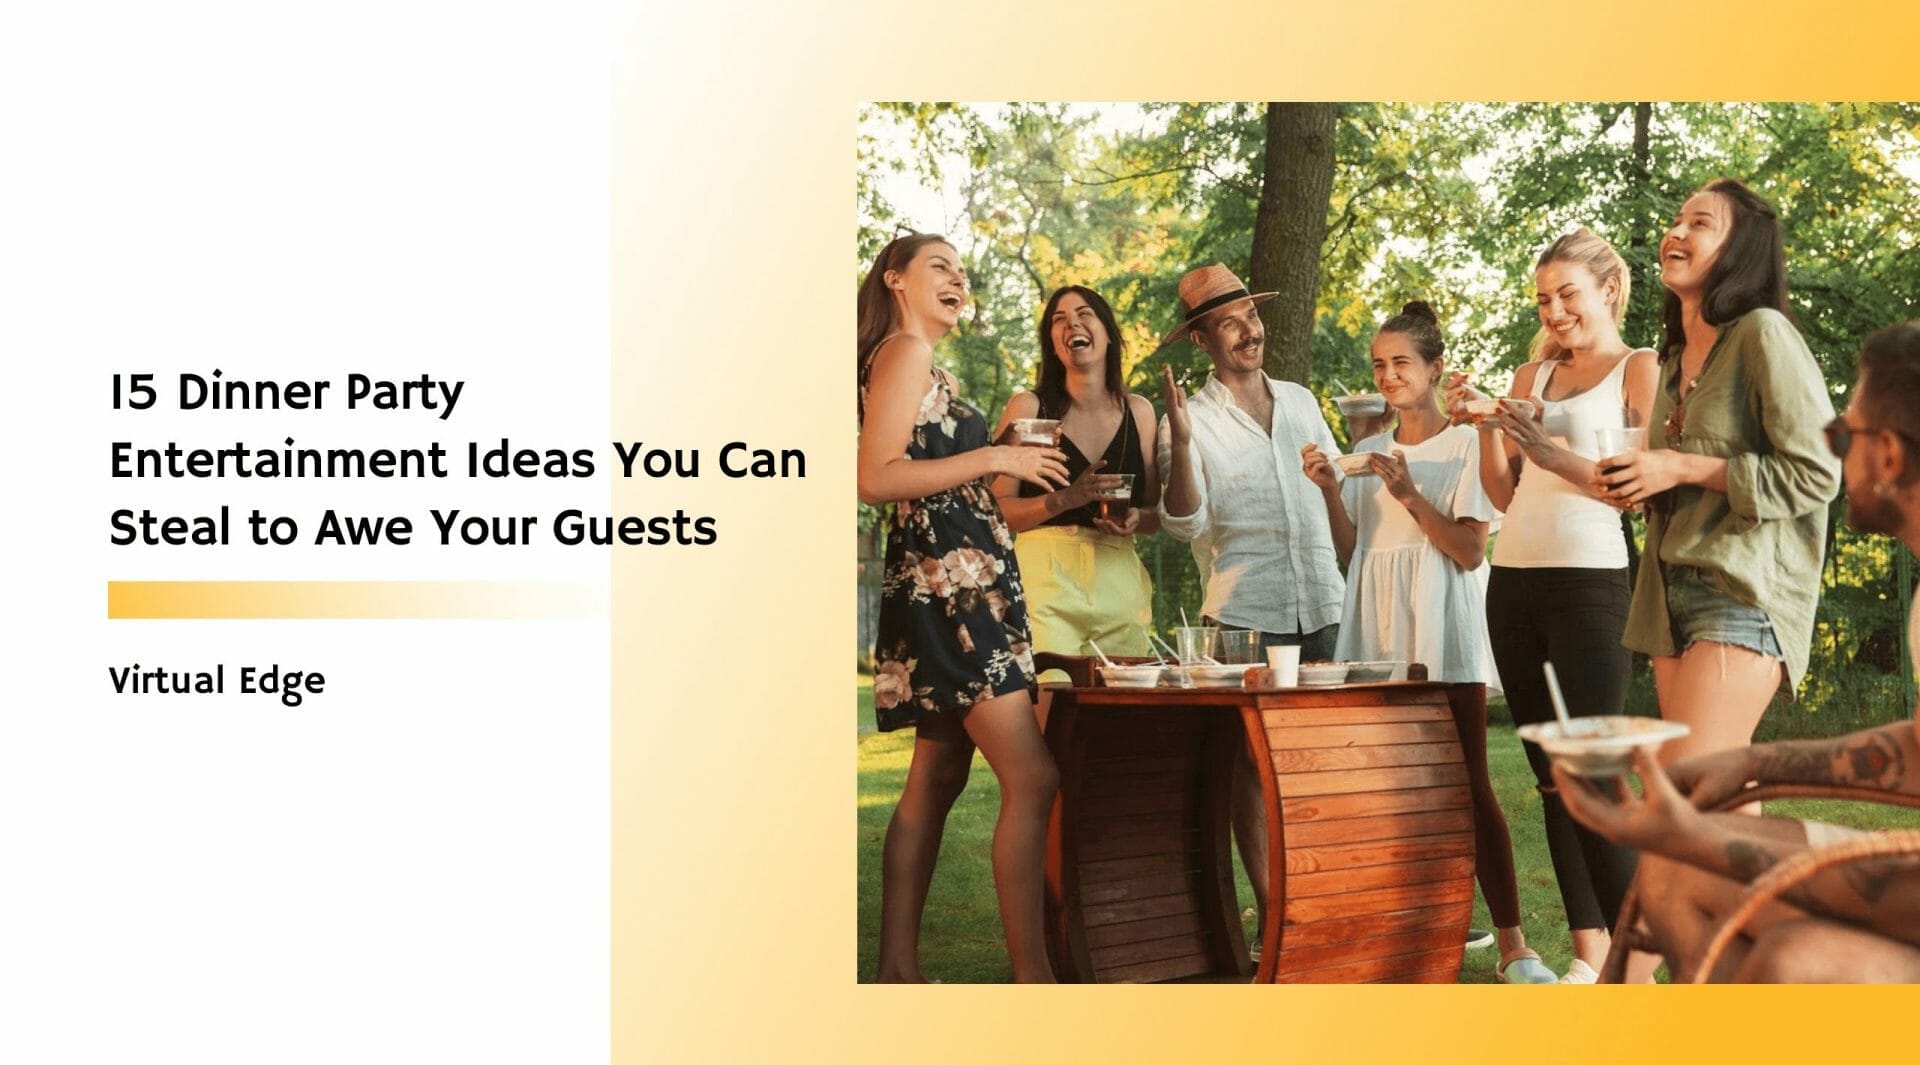 15 Dinner Party Entertainment Ideas You Can Steal to Awe Your Guests